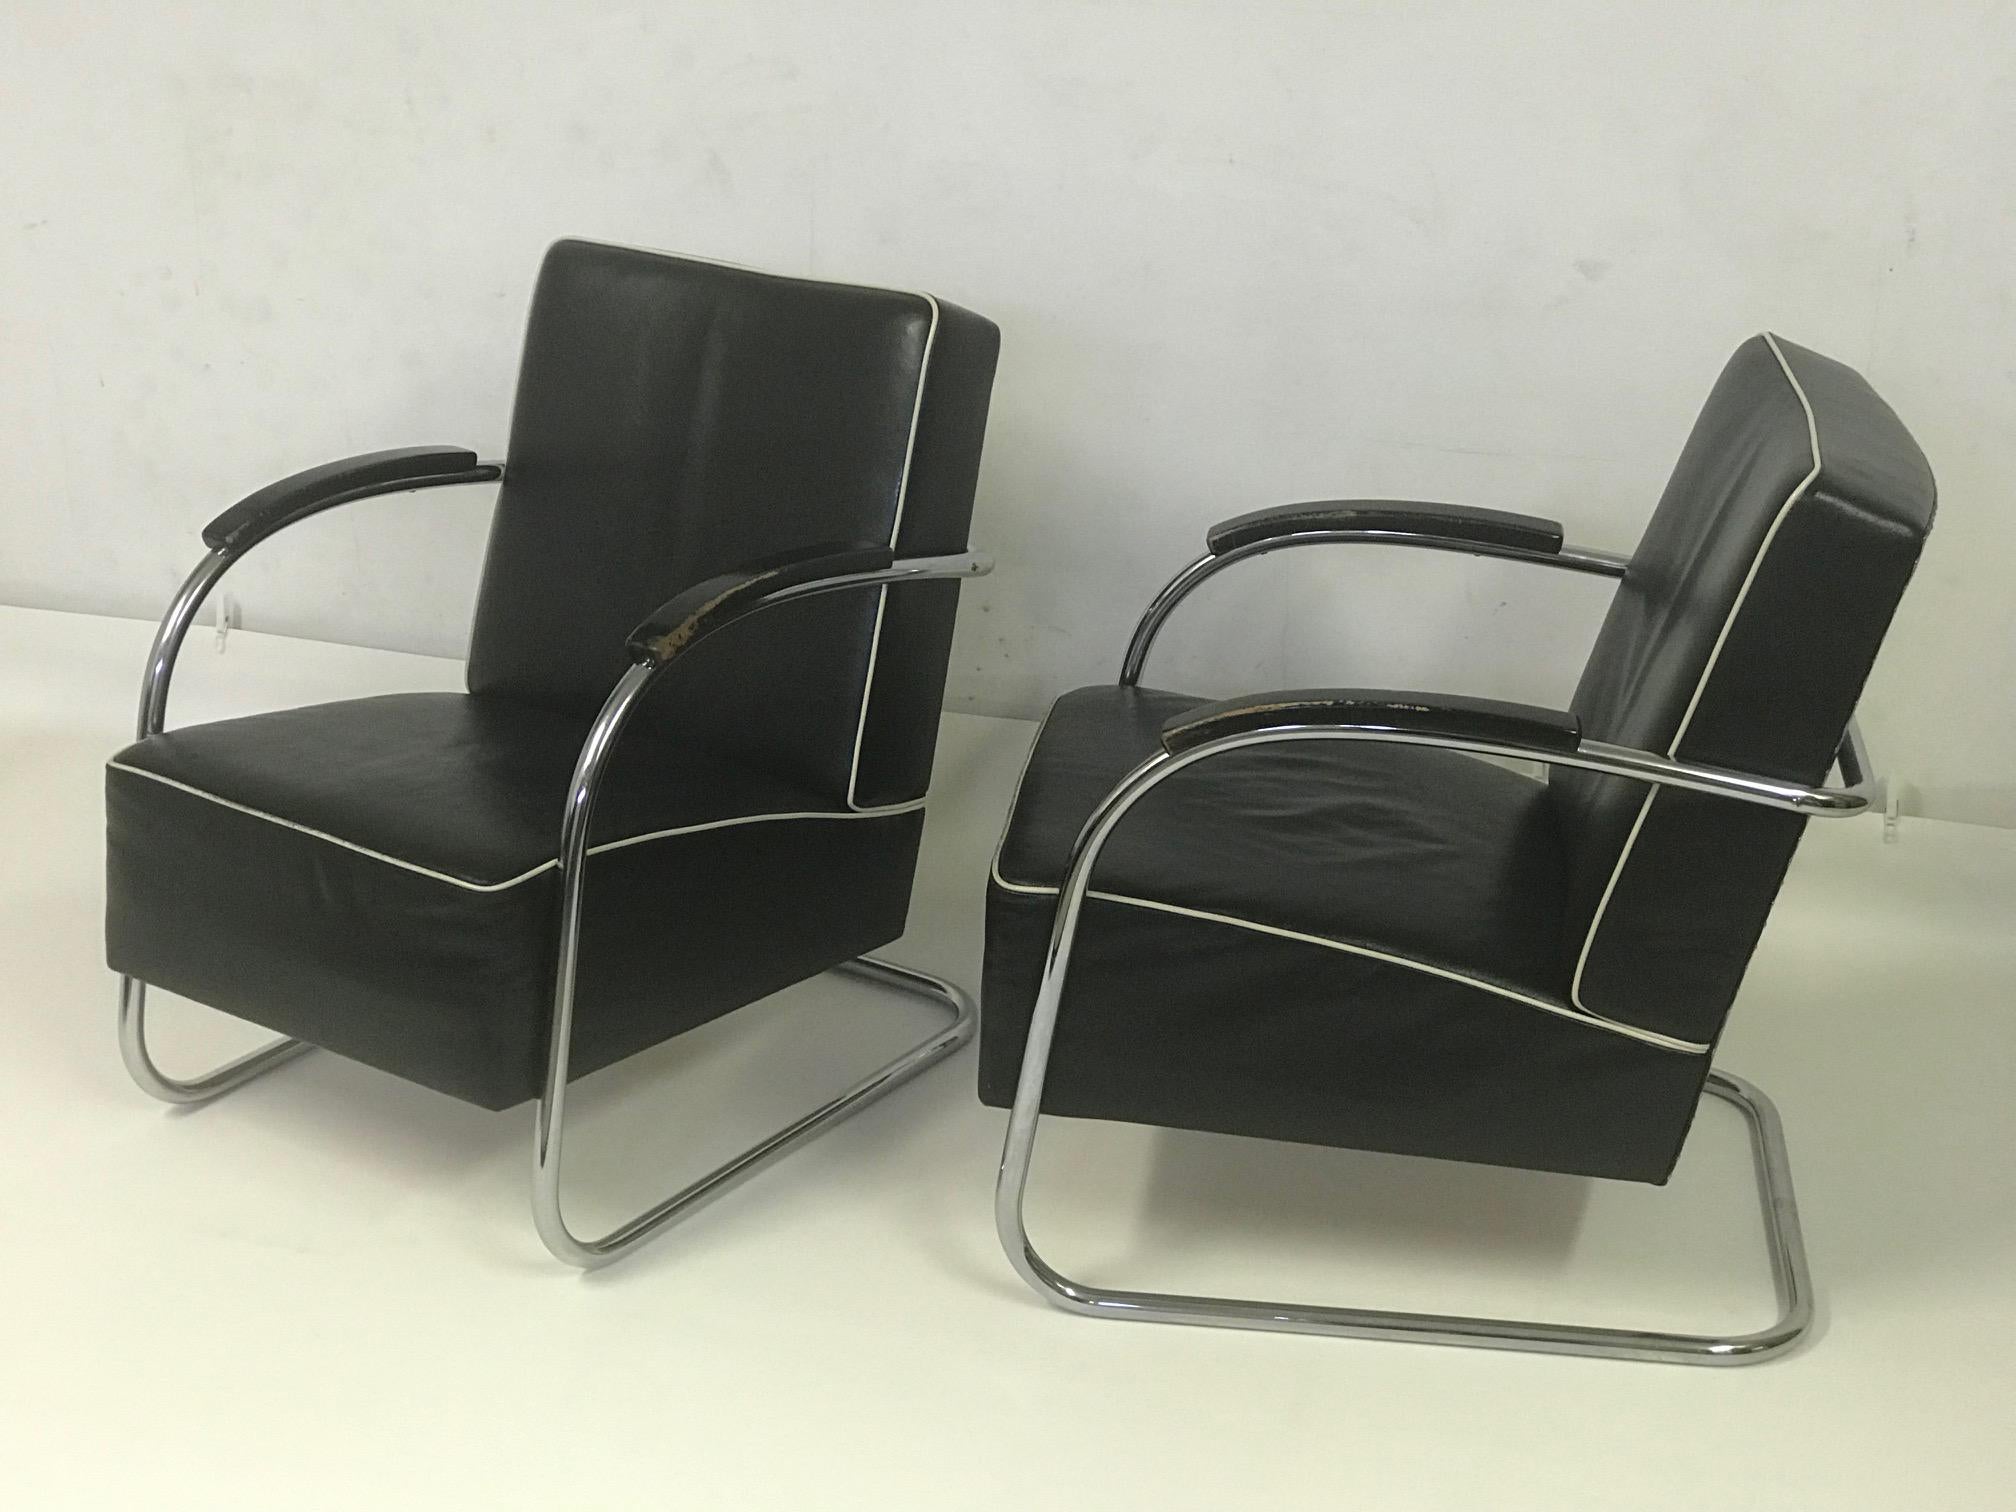 The chairs are made of the steel chromed construction. The seats are made of black leather completed with white rim. They are in a good condition.